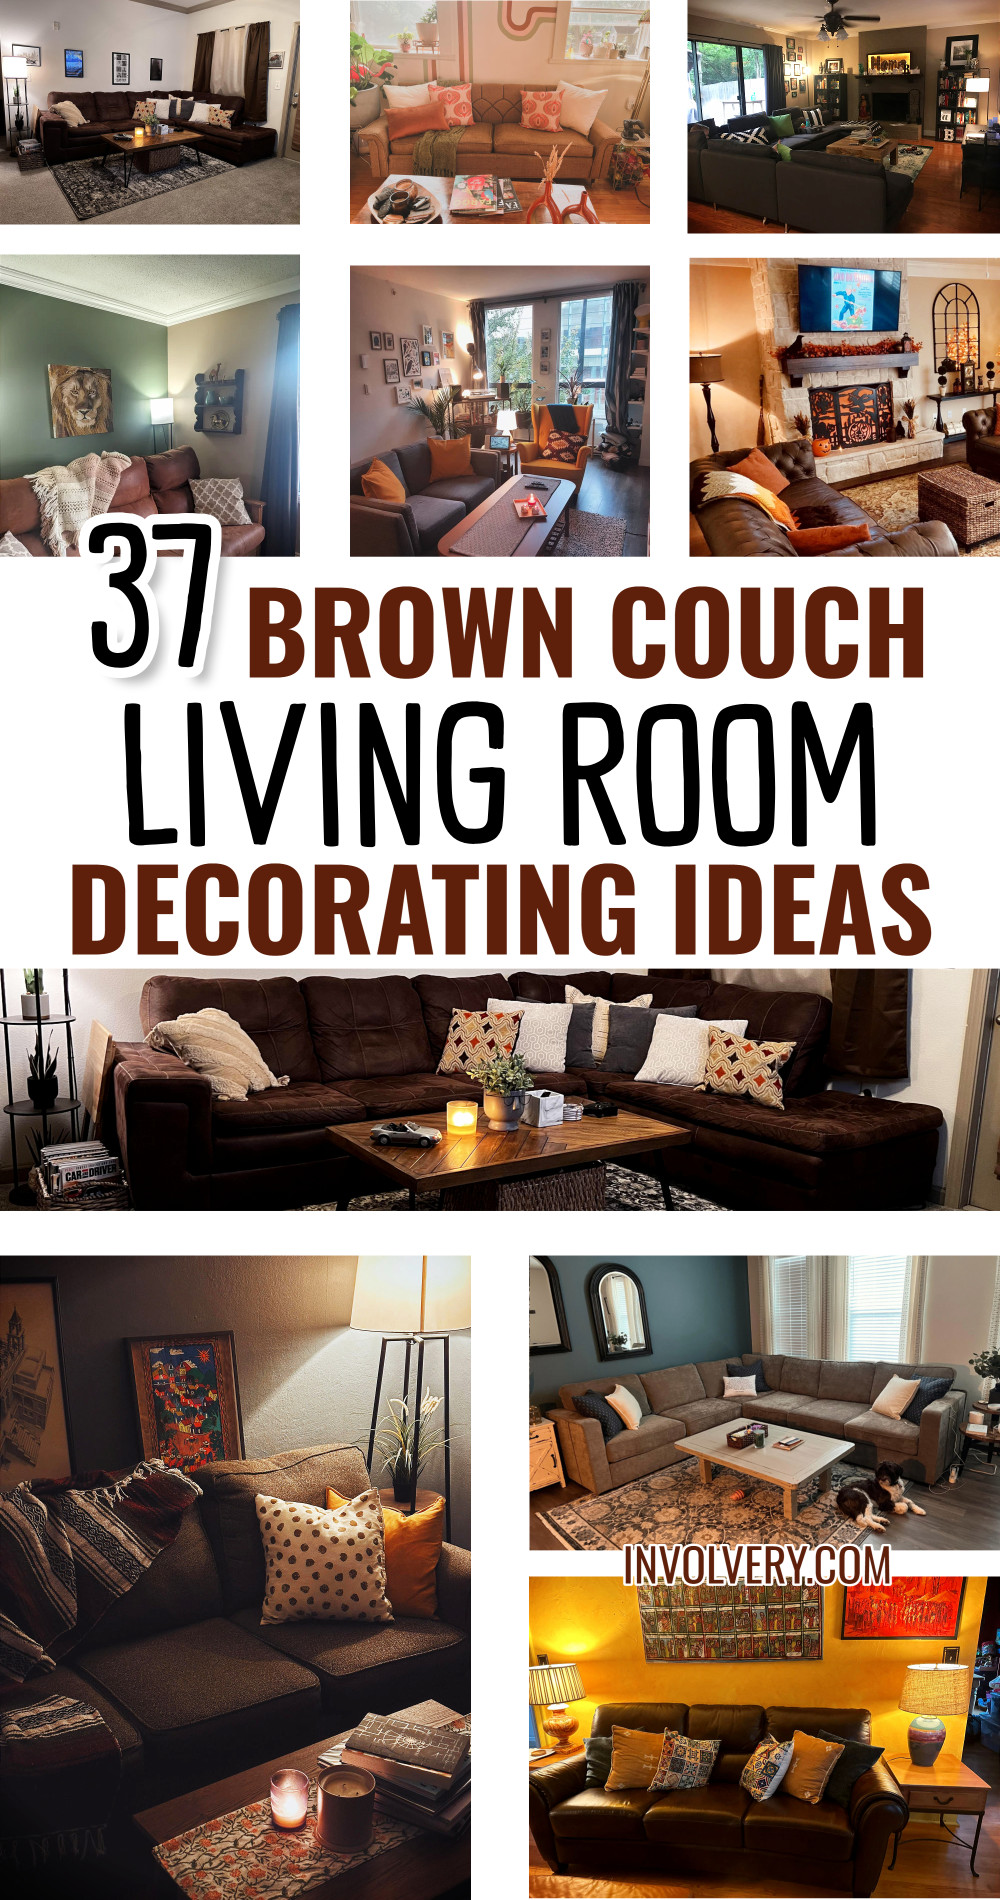 37 brown couch living room decorating ideas